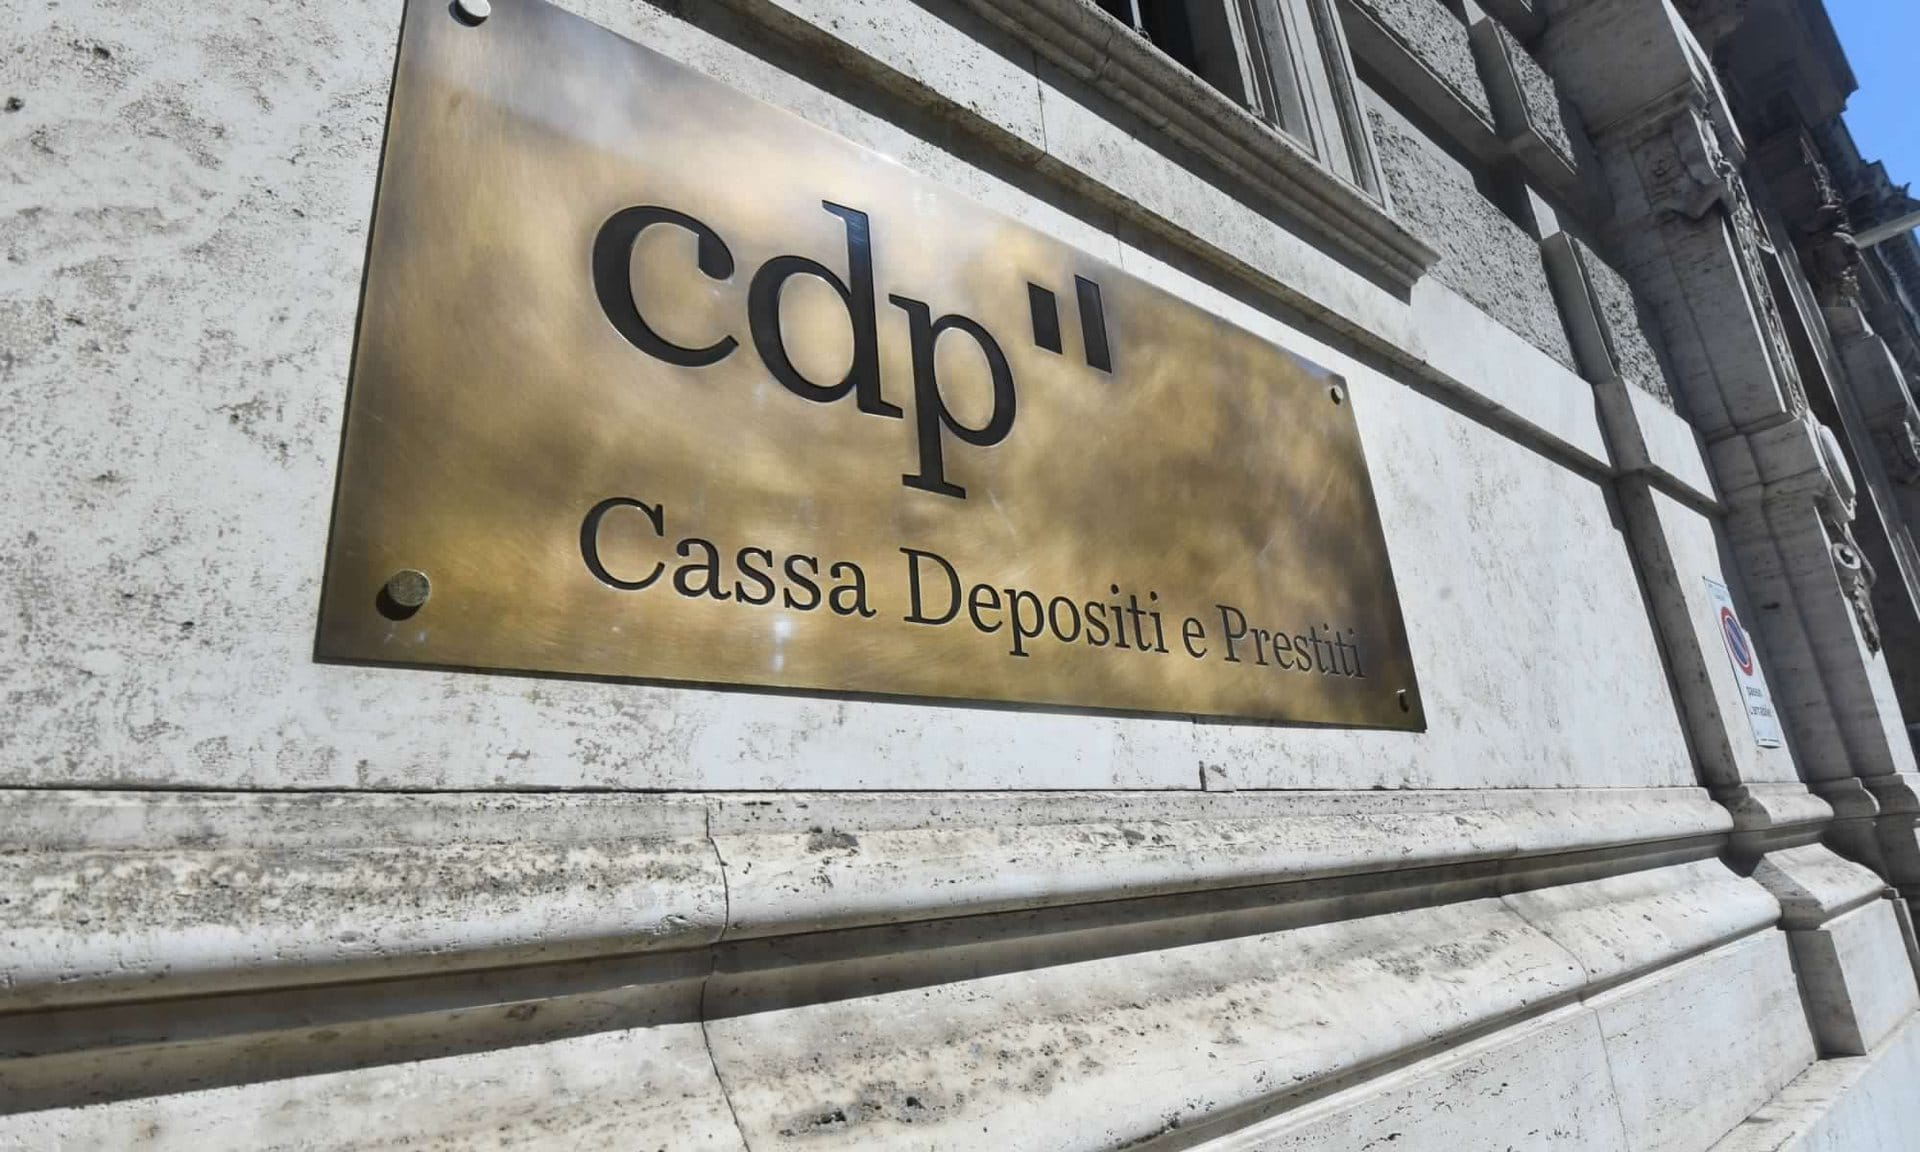 Cpd expands Industria Italiana’s trade matching platform to the United States